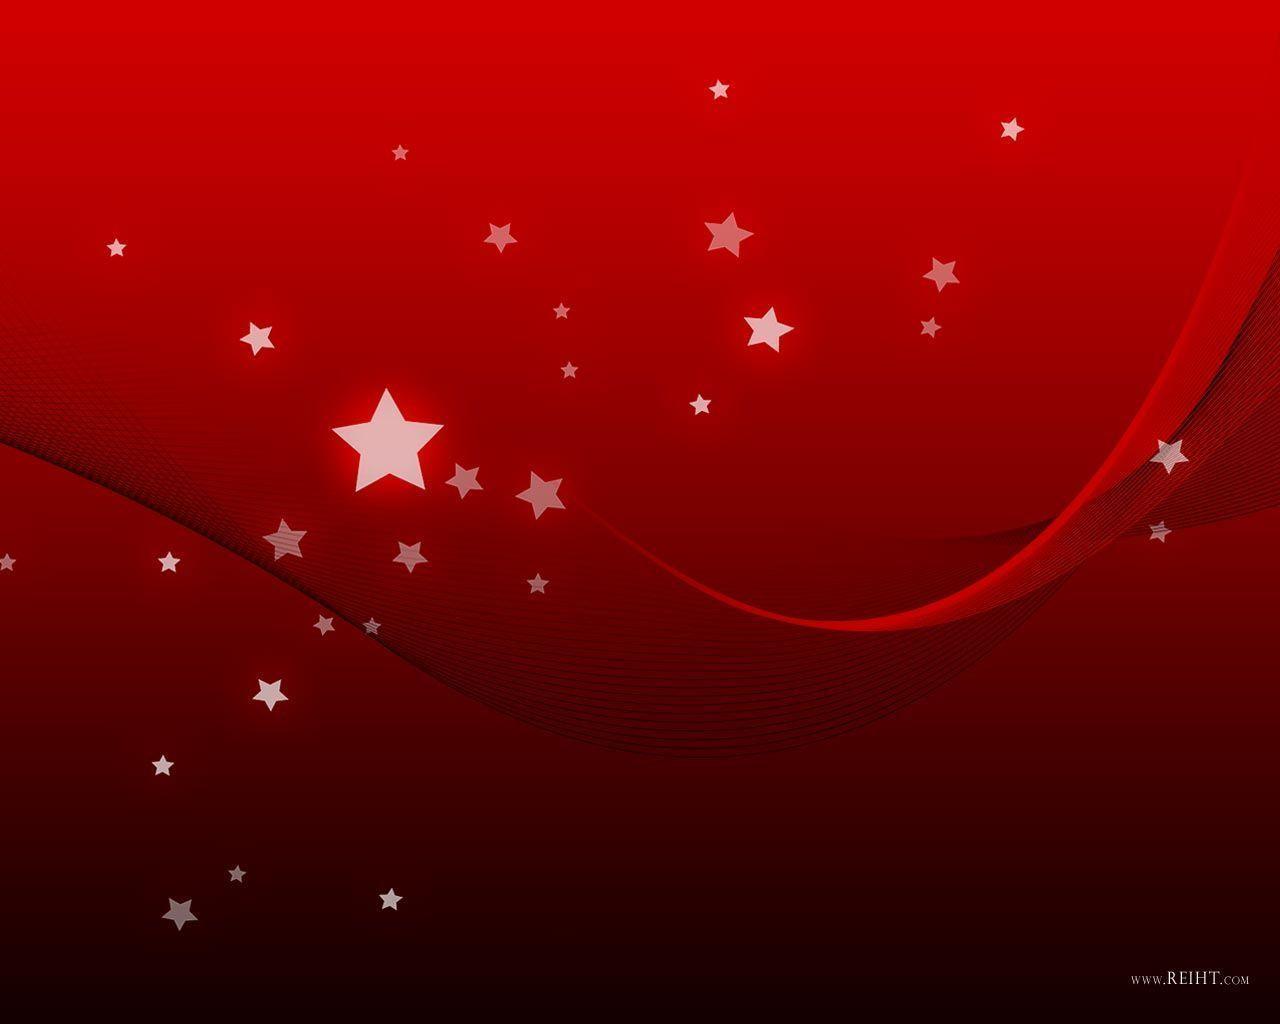 Red Christmas Star Wallpaper. Download Wide and HDHigh